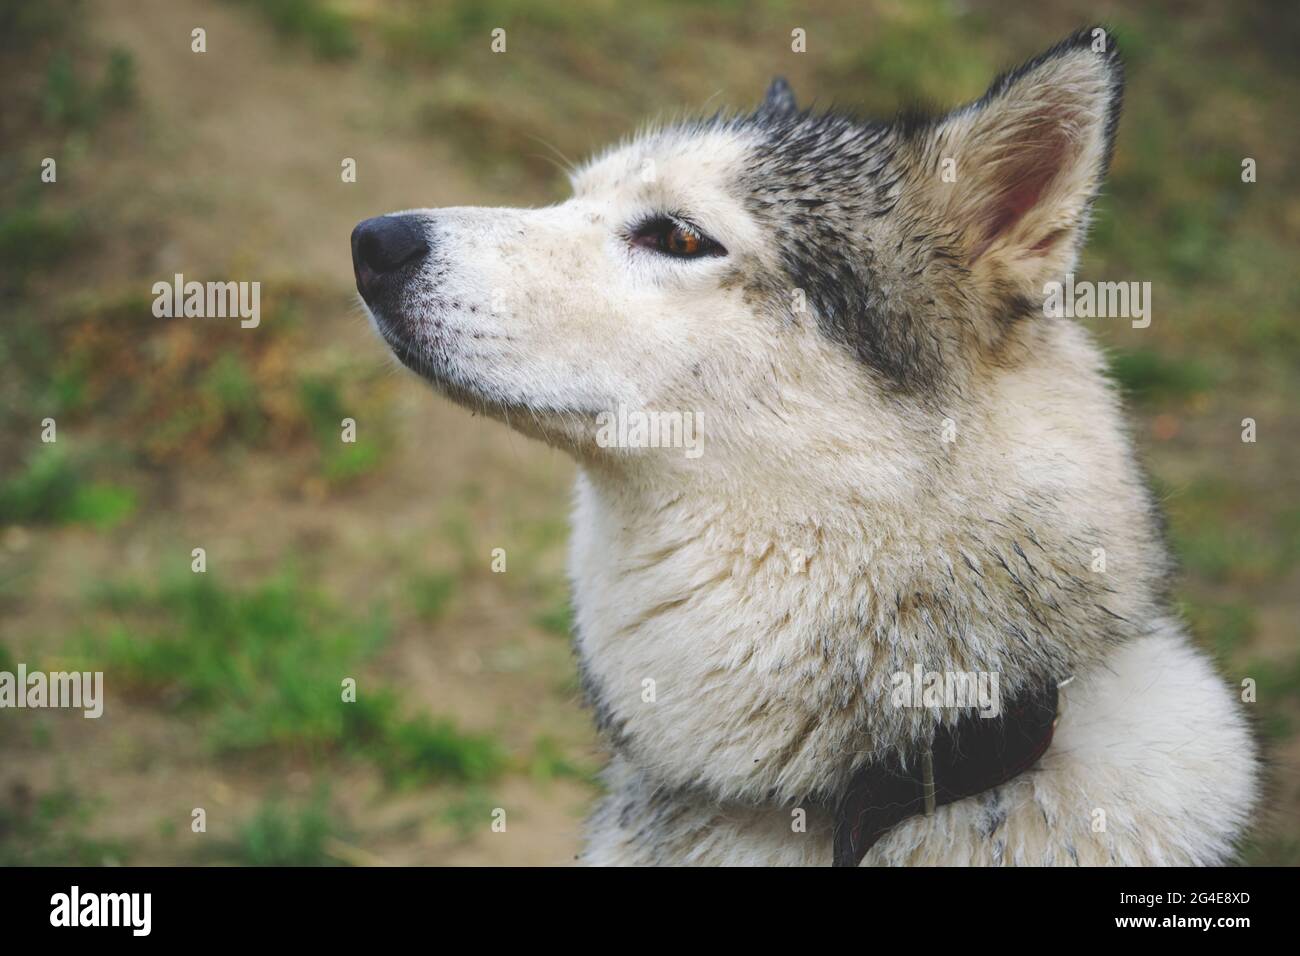 Husky dog pricked up his ears and sniffed air Stock Photo